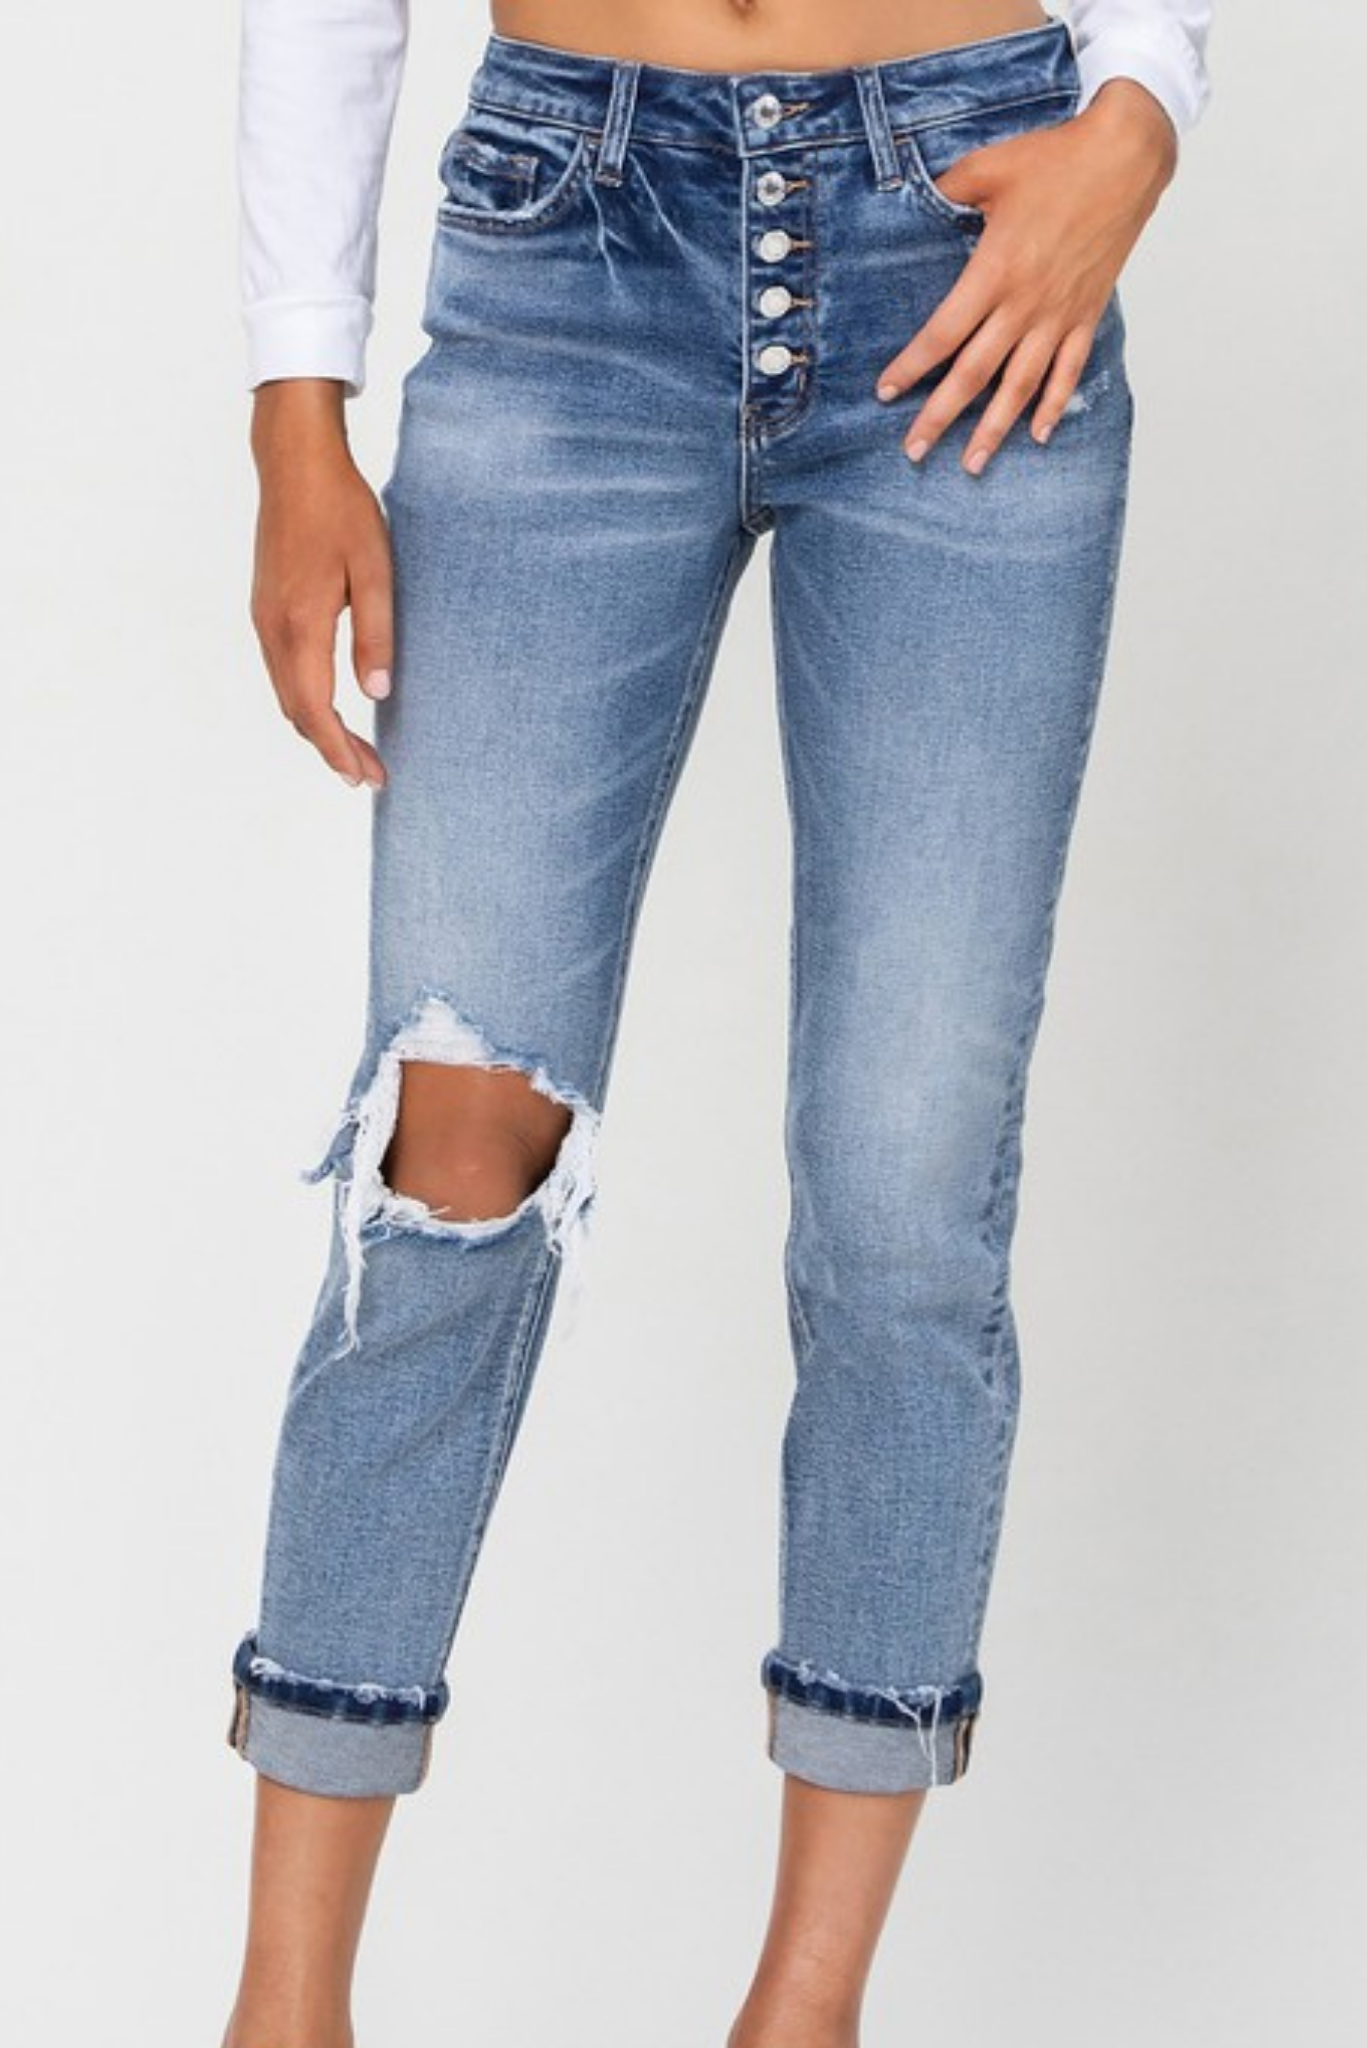 Load image into Gallery viewer, Light Wash Stretch Boyfriend Jeans*FINAL SALE*
